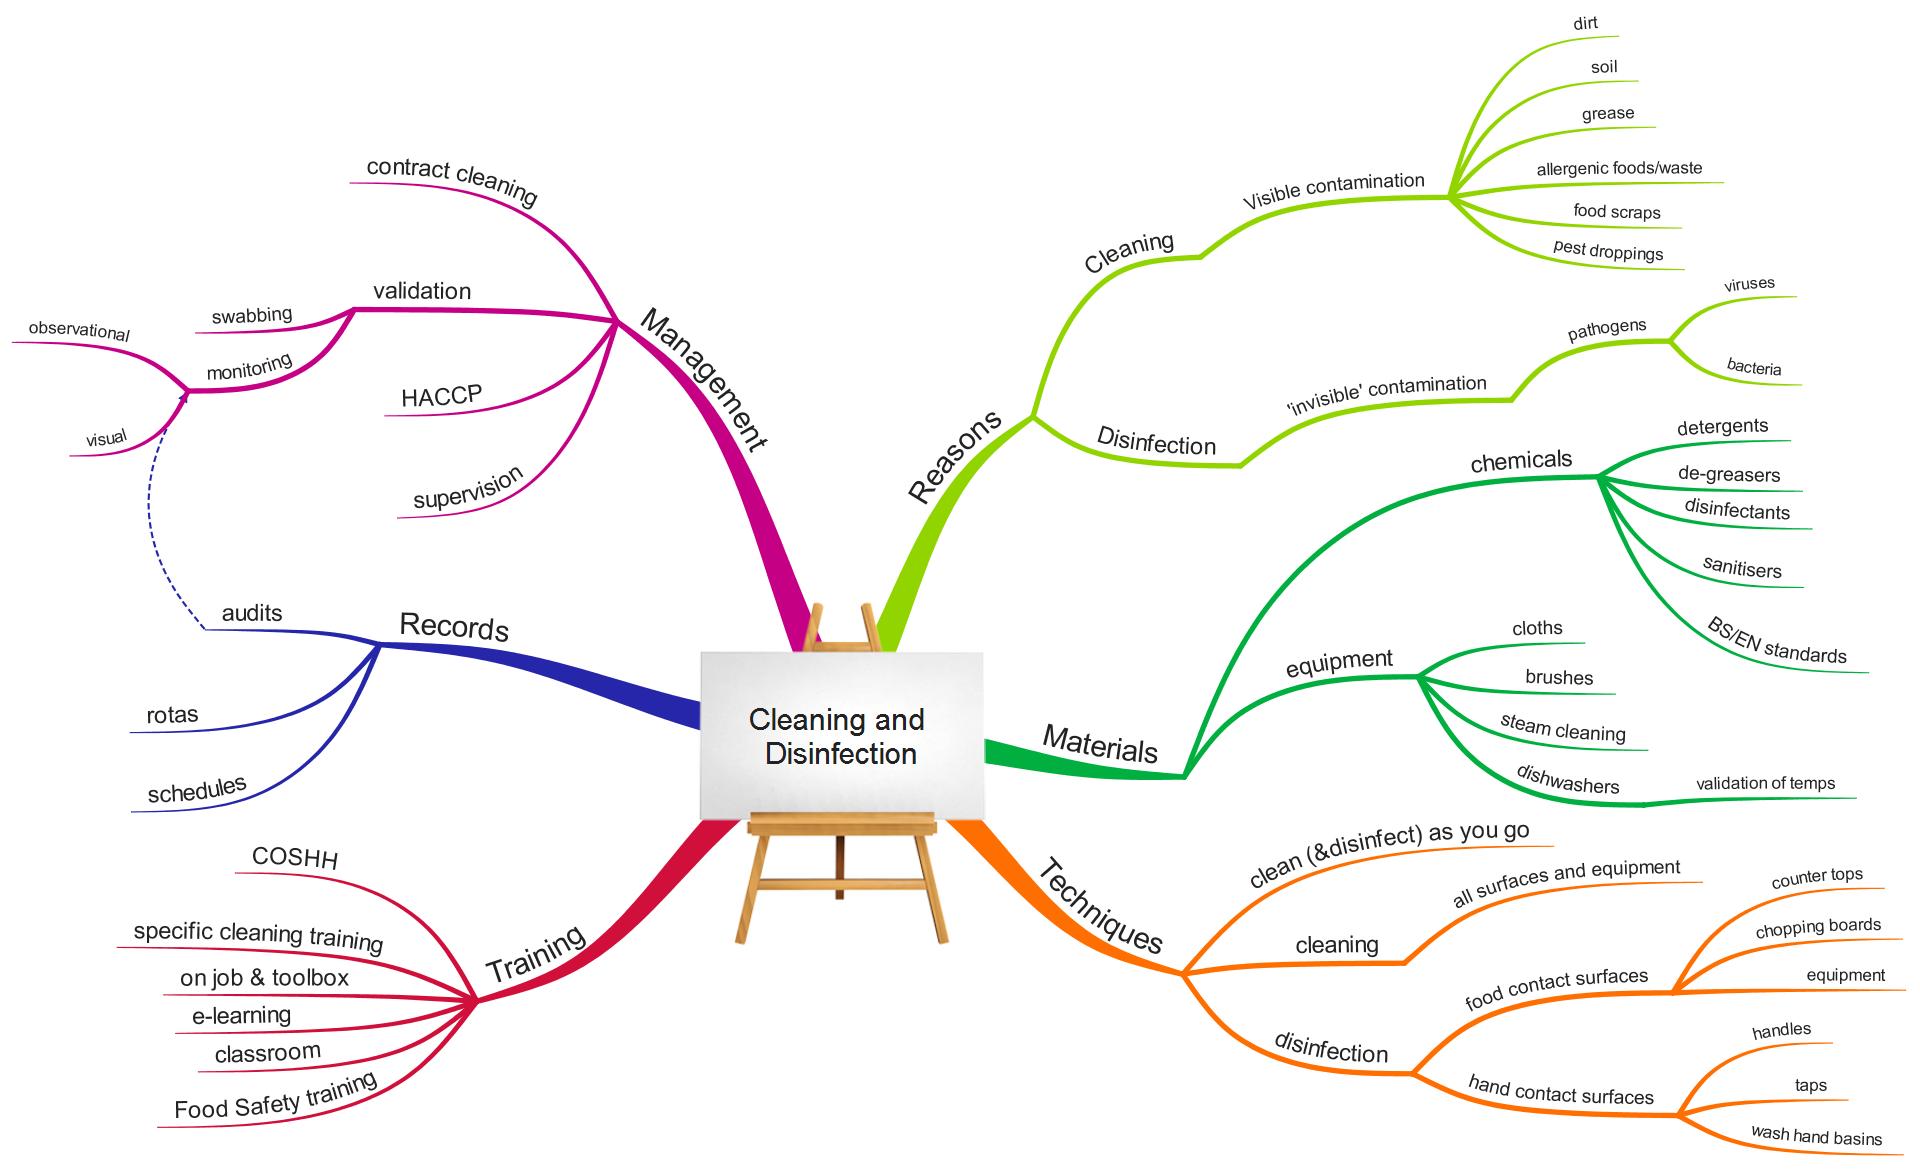 New! and free! Cleaning Mindmap  The Creative Trainer - by David Newsum